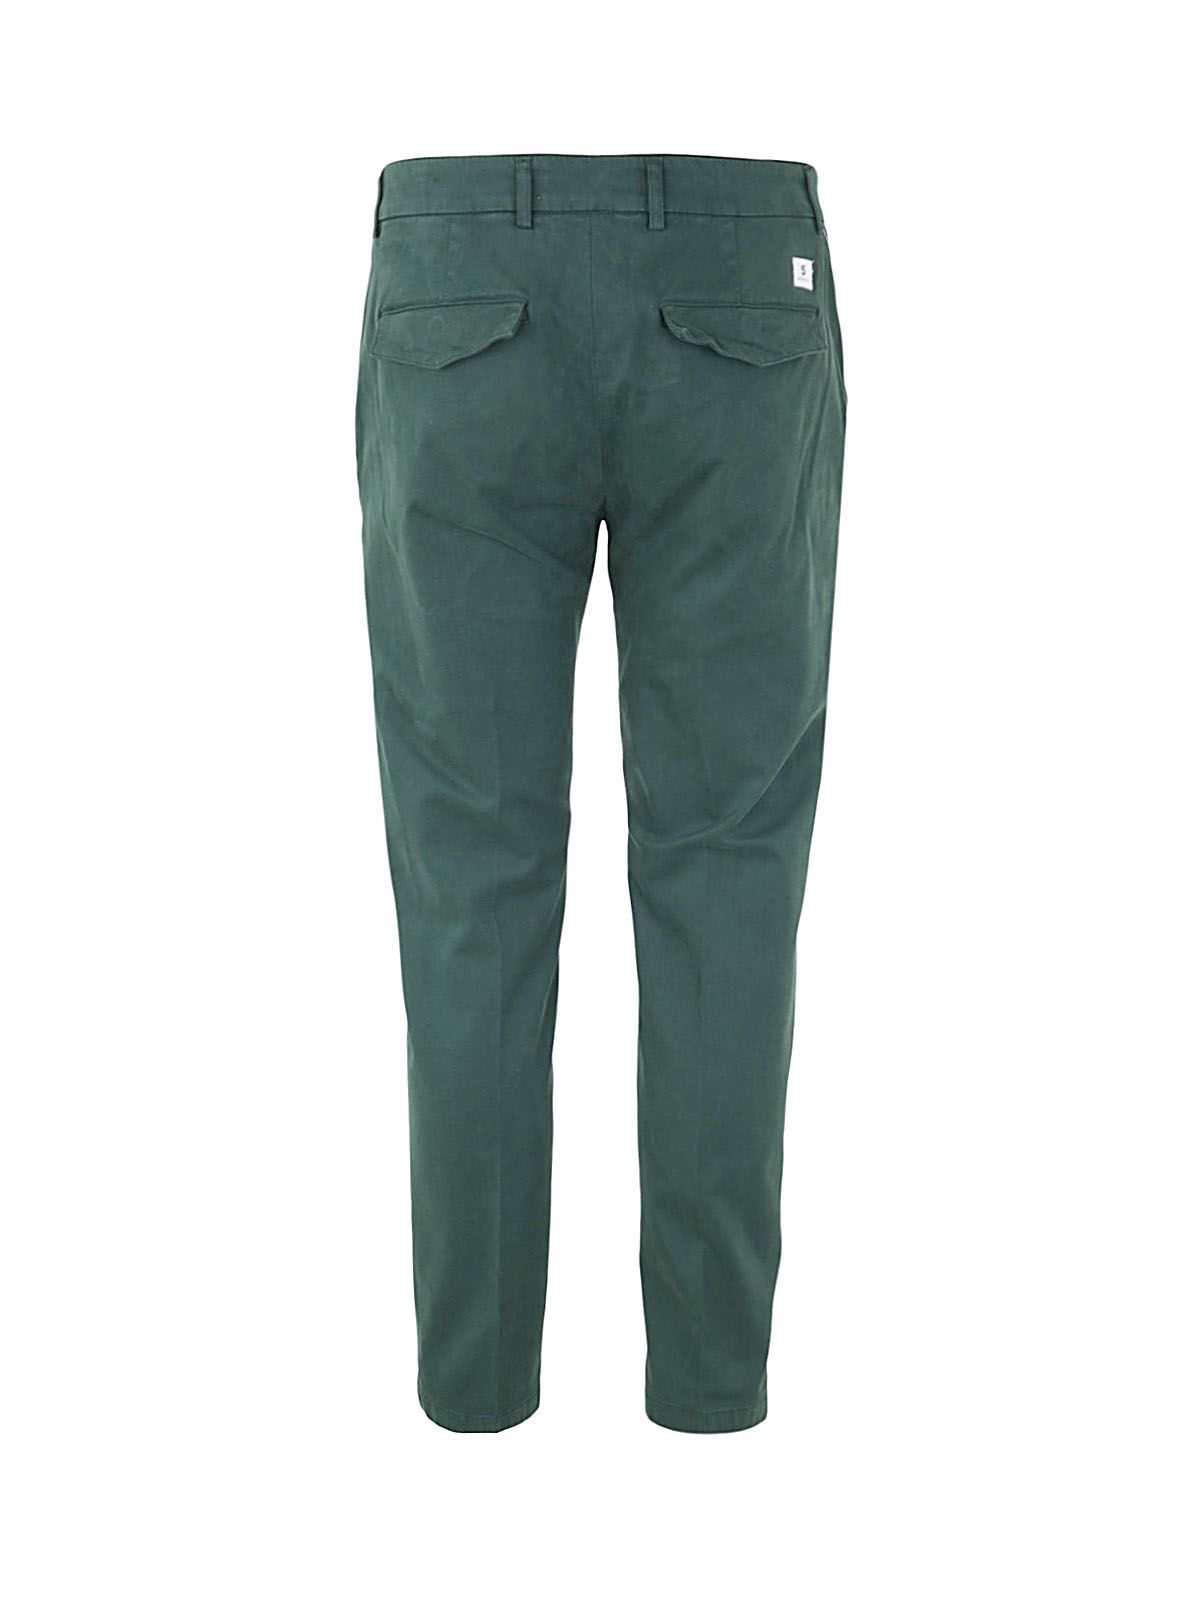 Shop Department Five Green Chino Trousers